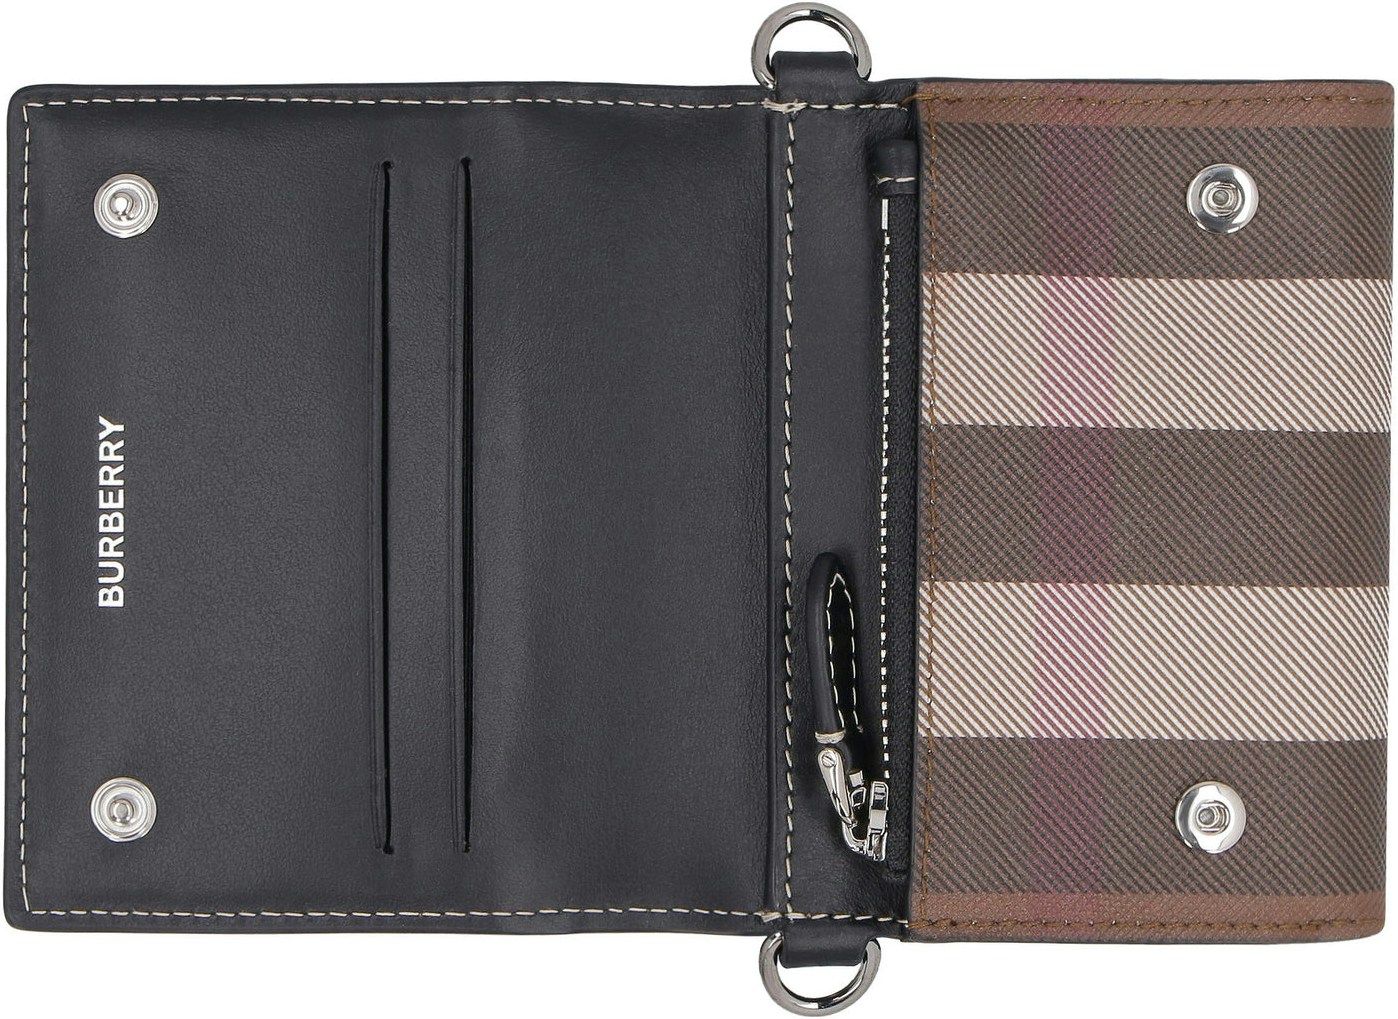 A8900 BURBERRY CHECKED WALLET WITH SHOULDER STRAP